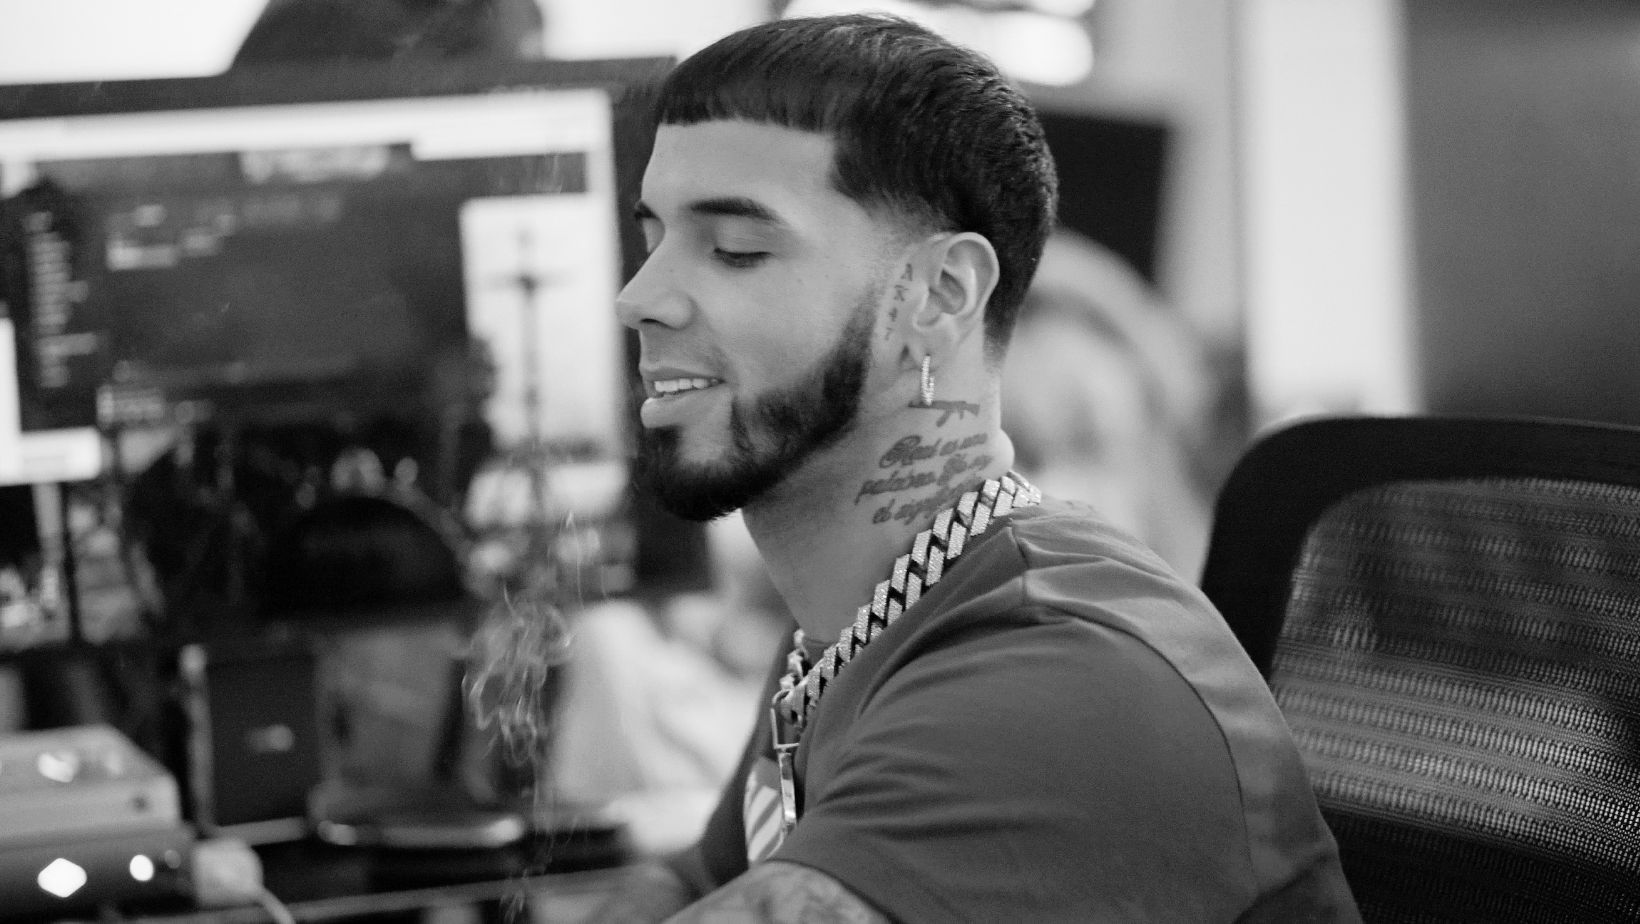 Anuel Released a New Song Dedicated to Karol G – Here is How People Are Reacting